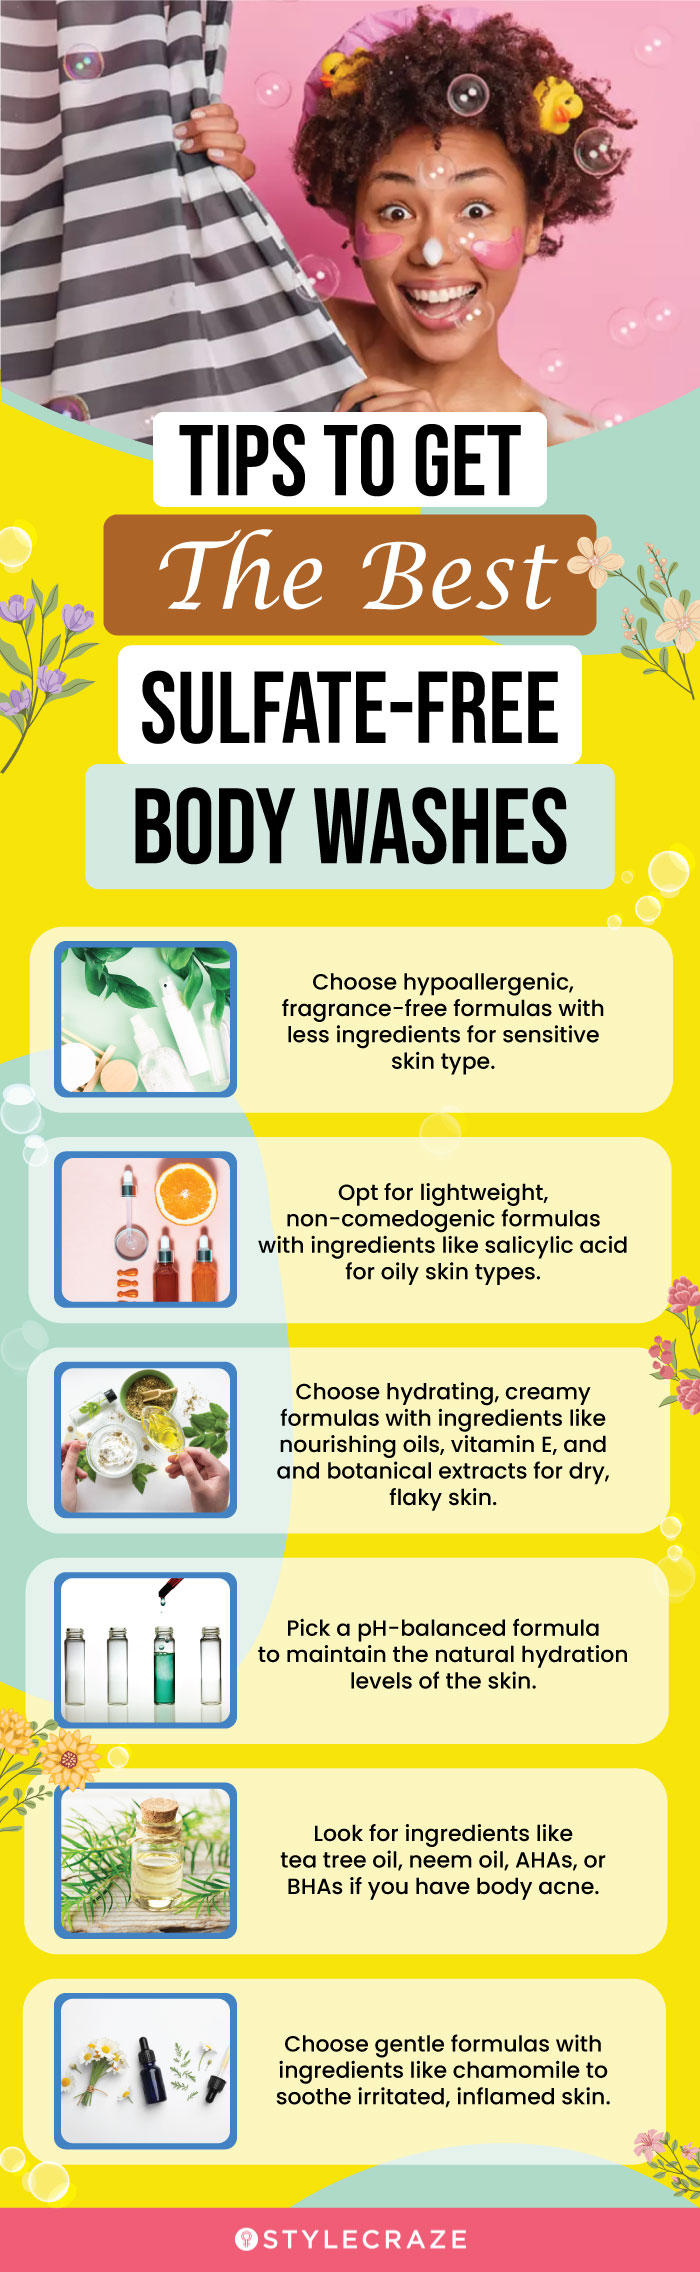 Tips To Get The Best Sulfate-Free Body Washes